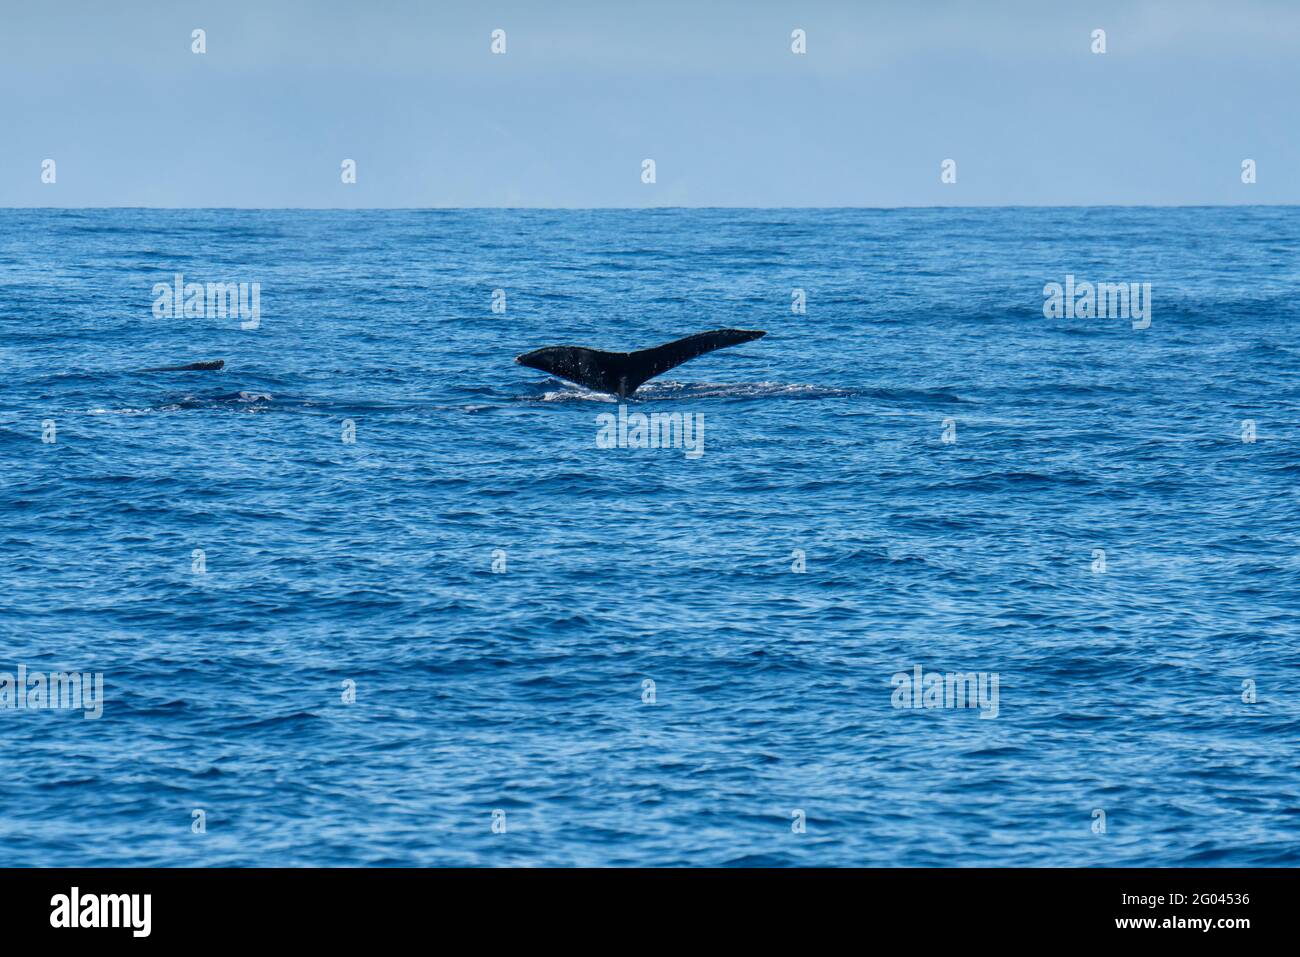 Maui, Hawaii. Whale swimming in the pacific ocean with tail showing. Stock Photo